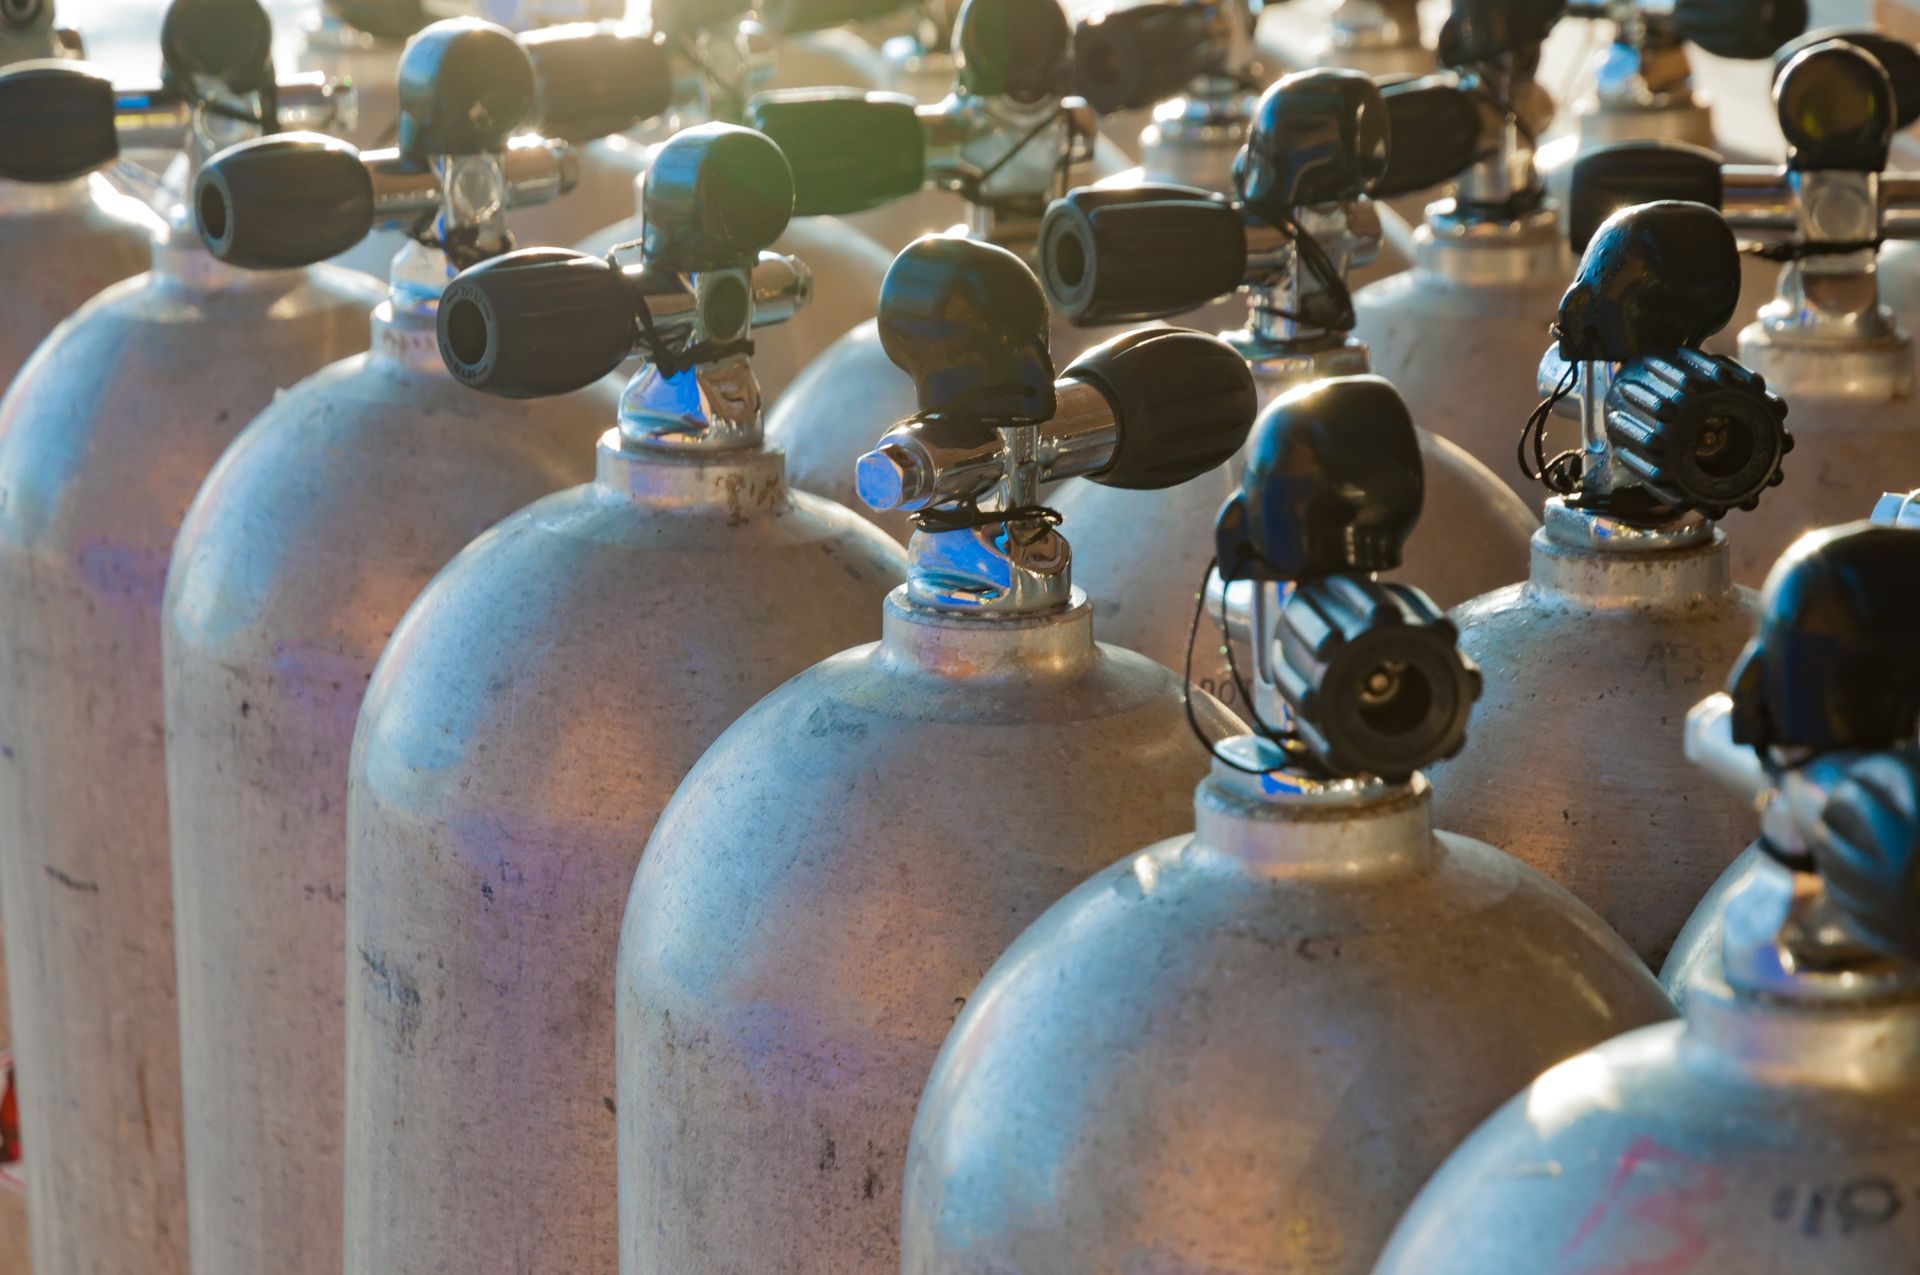 Advantages of Partnering with a Cylinder Gas Distribution Company: What to Look For